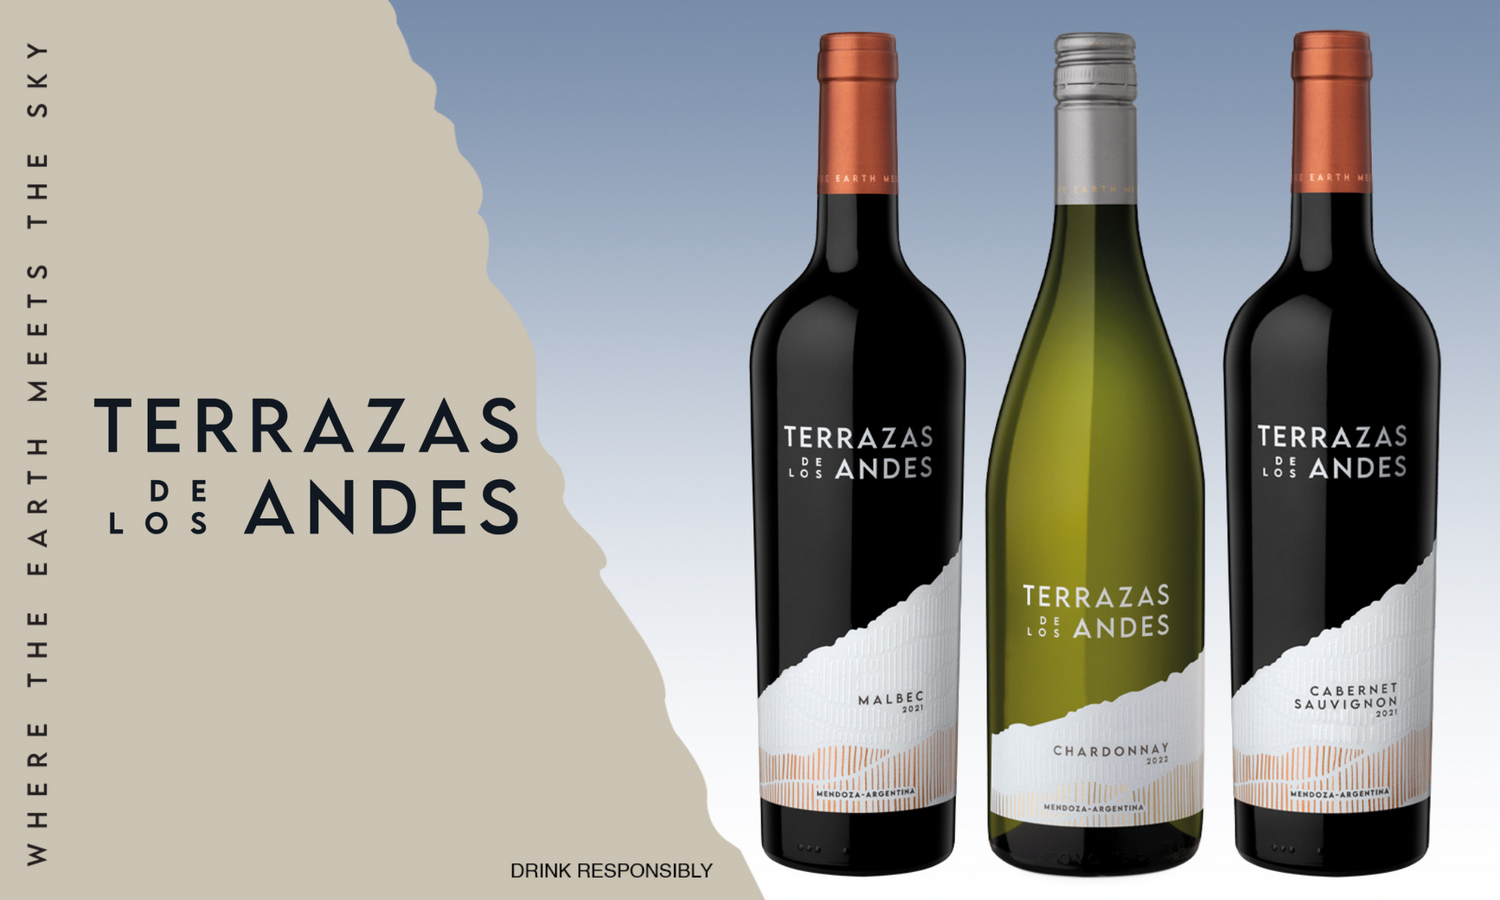 terrazas de los andes red wine and white wine available in the philippines